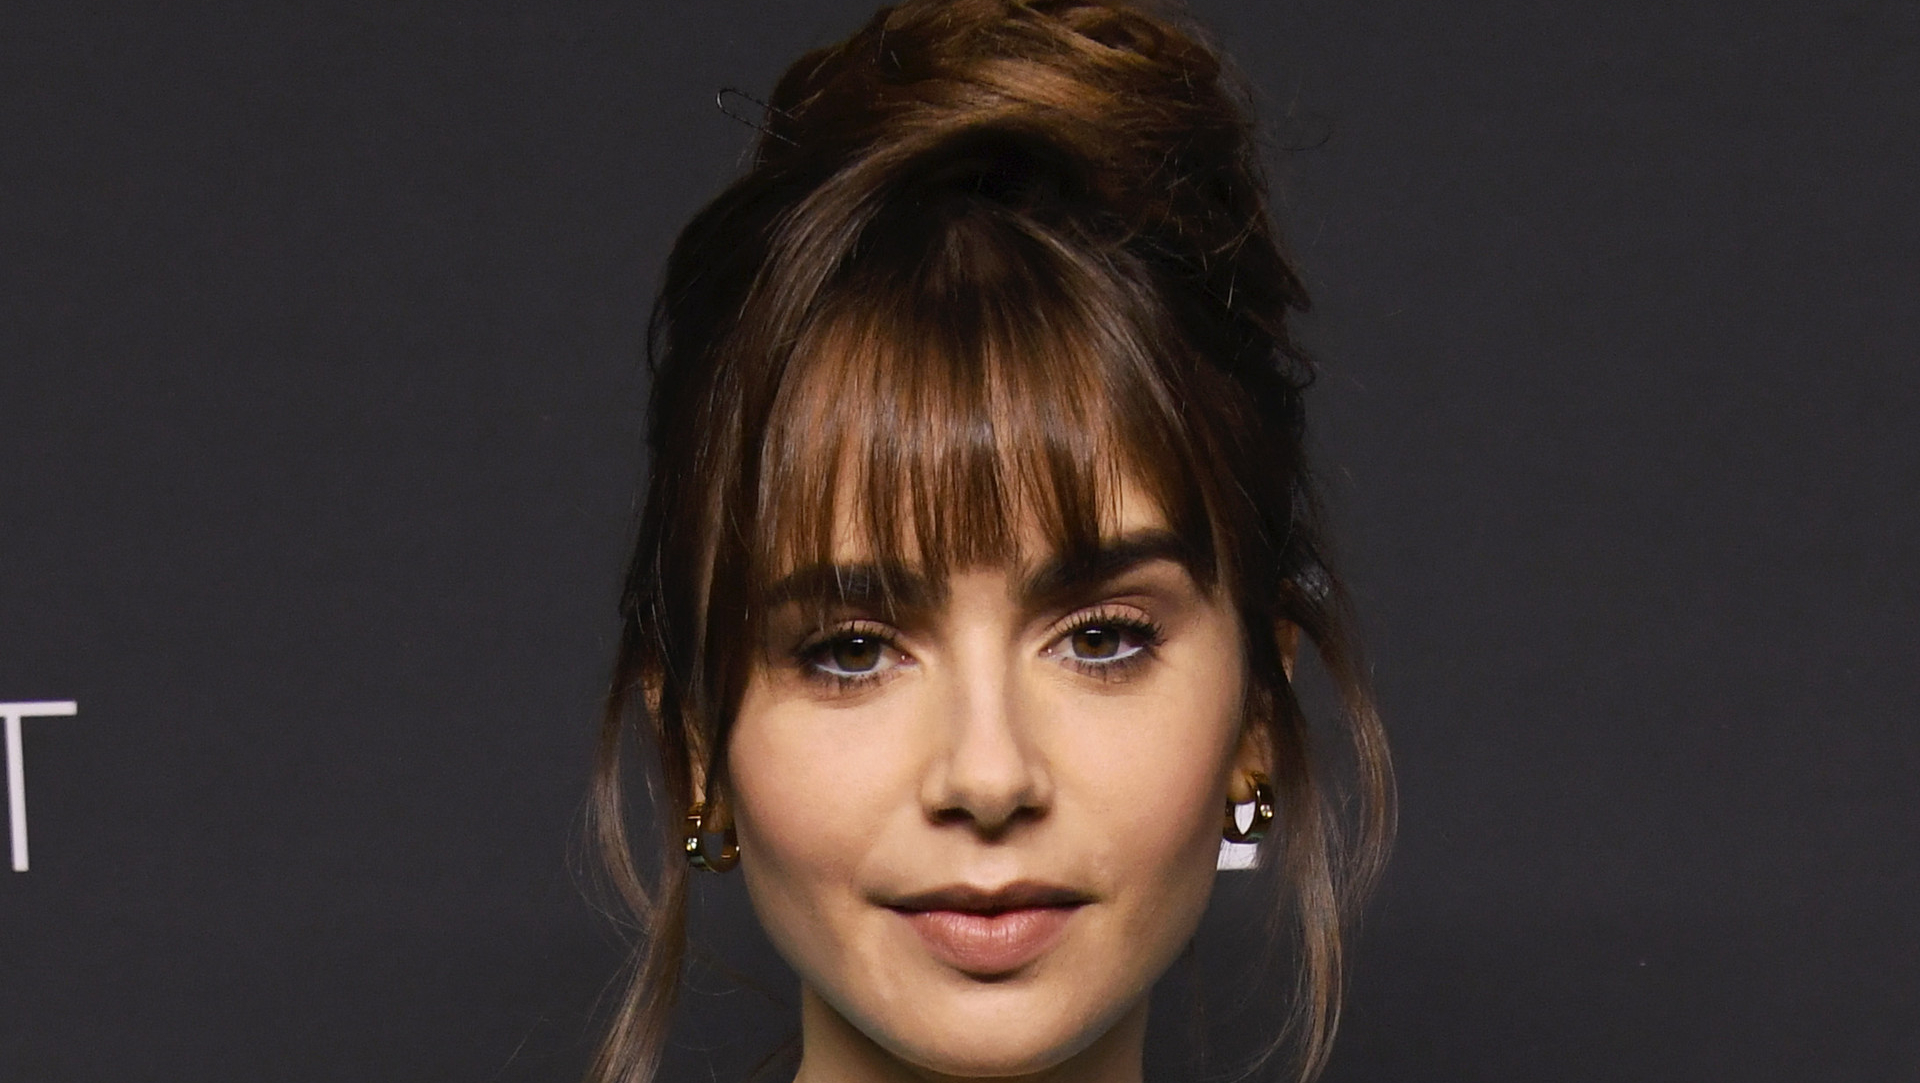 19 Celebrities With Bangs Sure To Convince You To Make